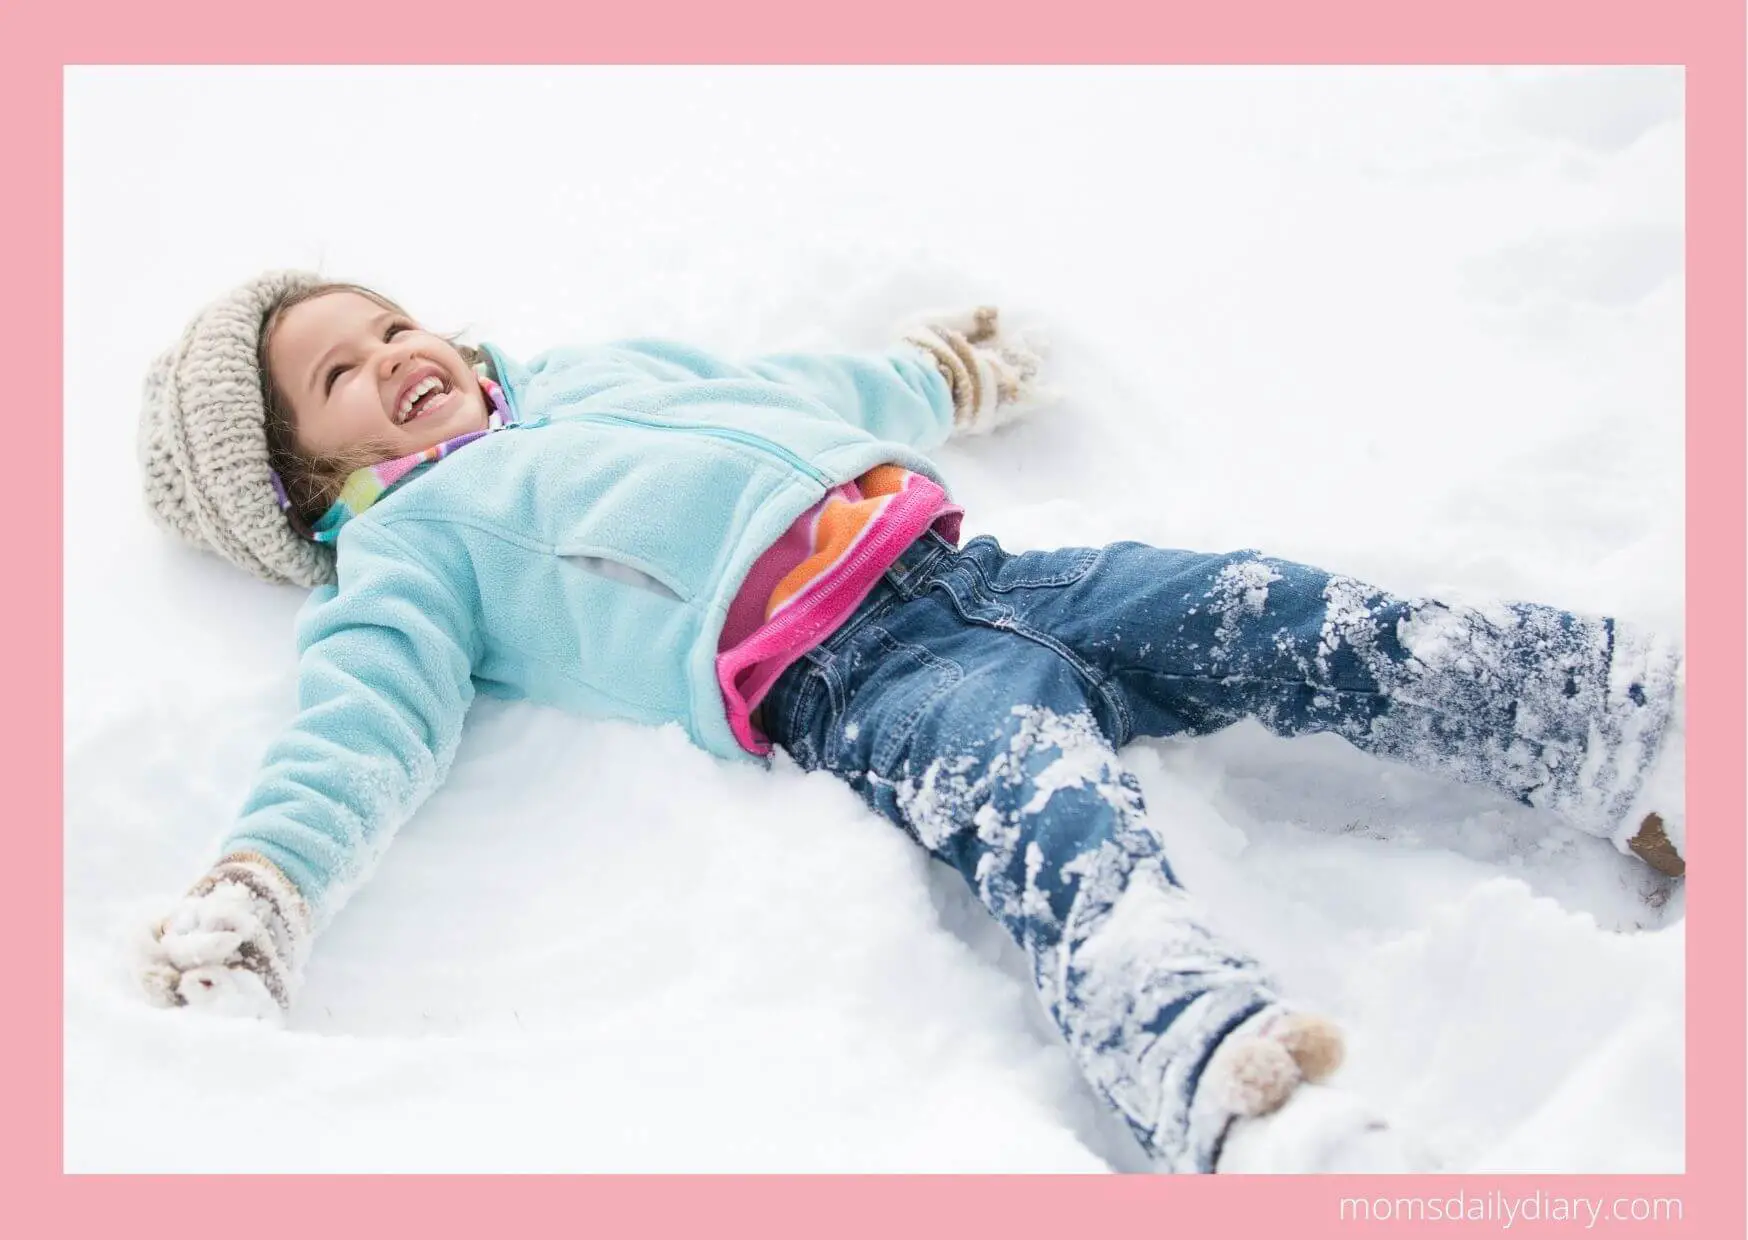 Winter activities: Toddler making a snow angel.